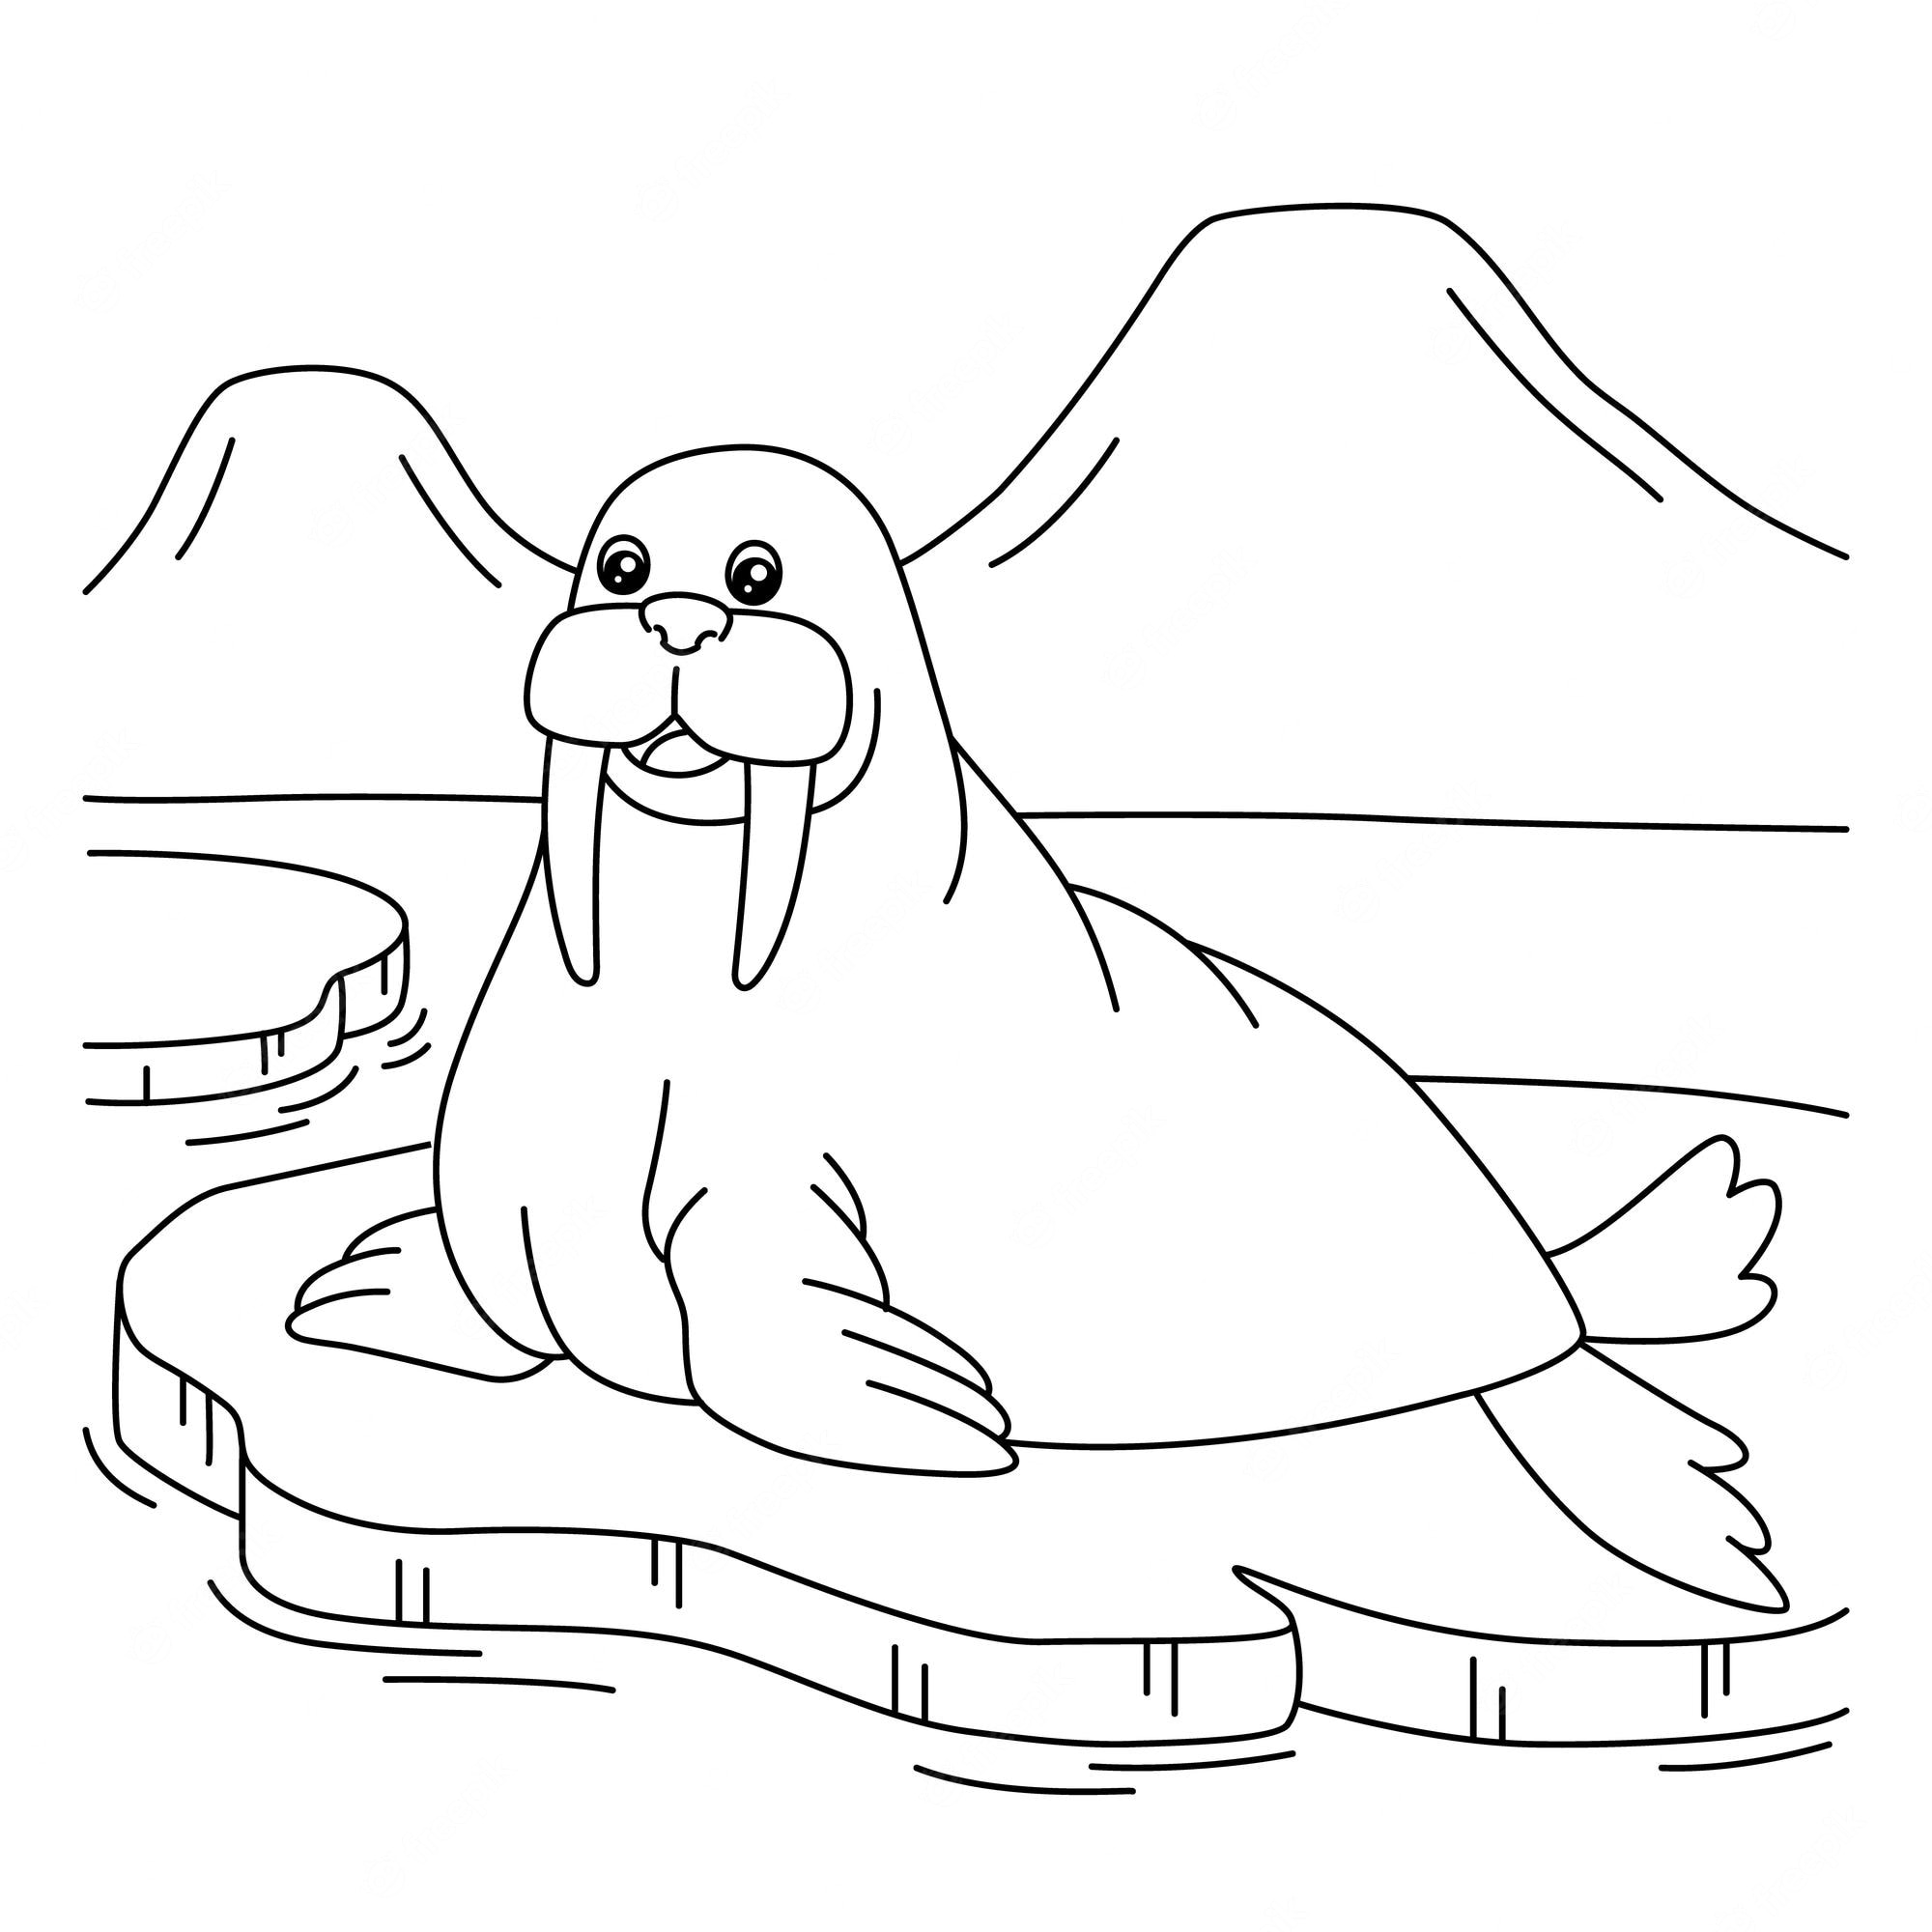 Premium Vector | Walrus coloring page for kids